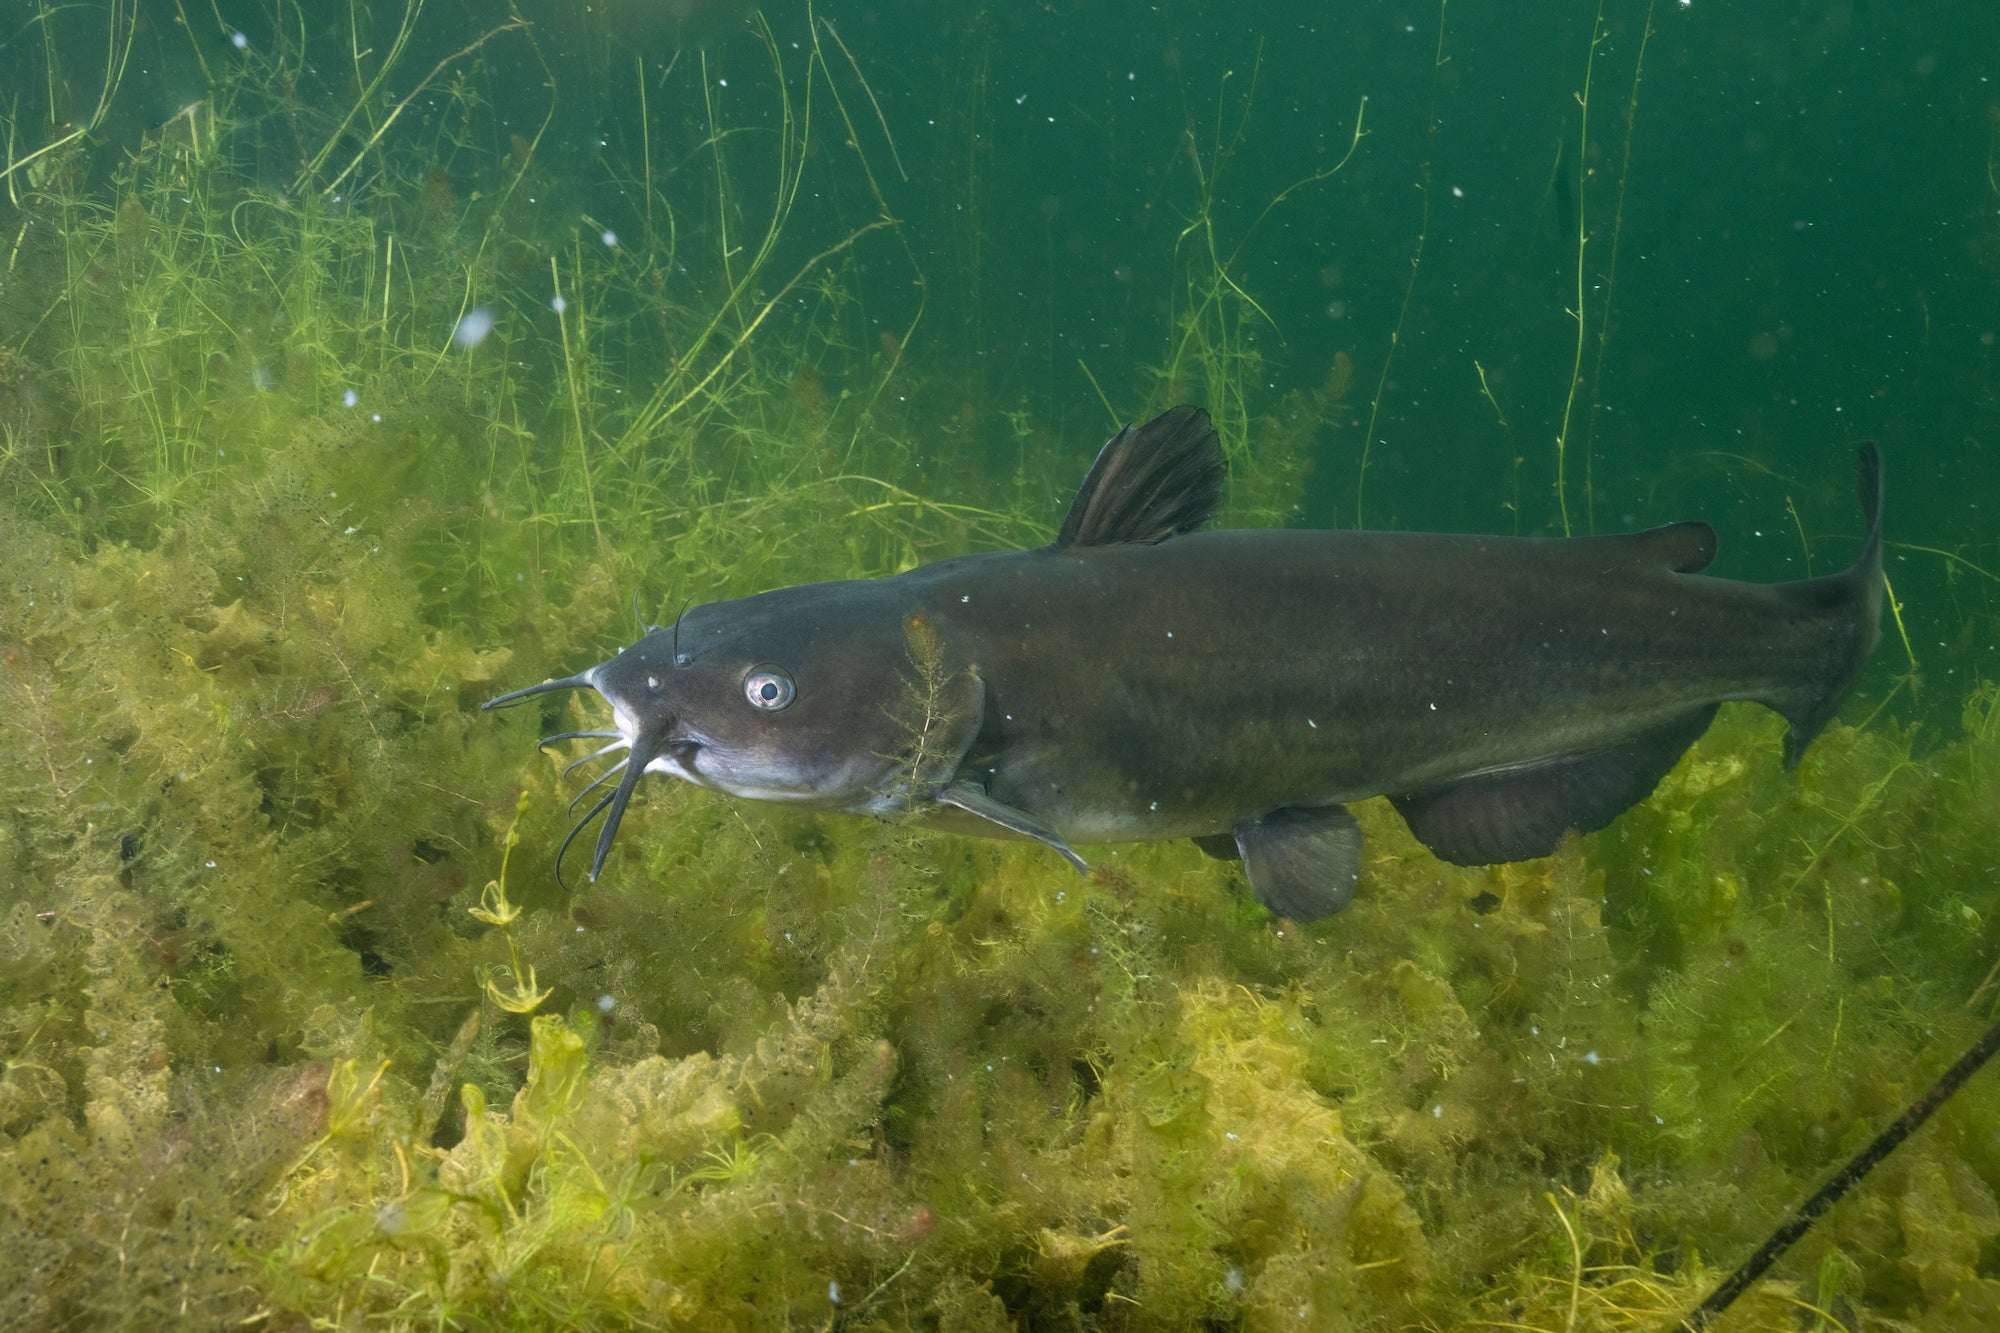 More often than not, catfish are found on or near the bottom of waterbodies.